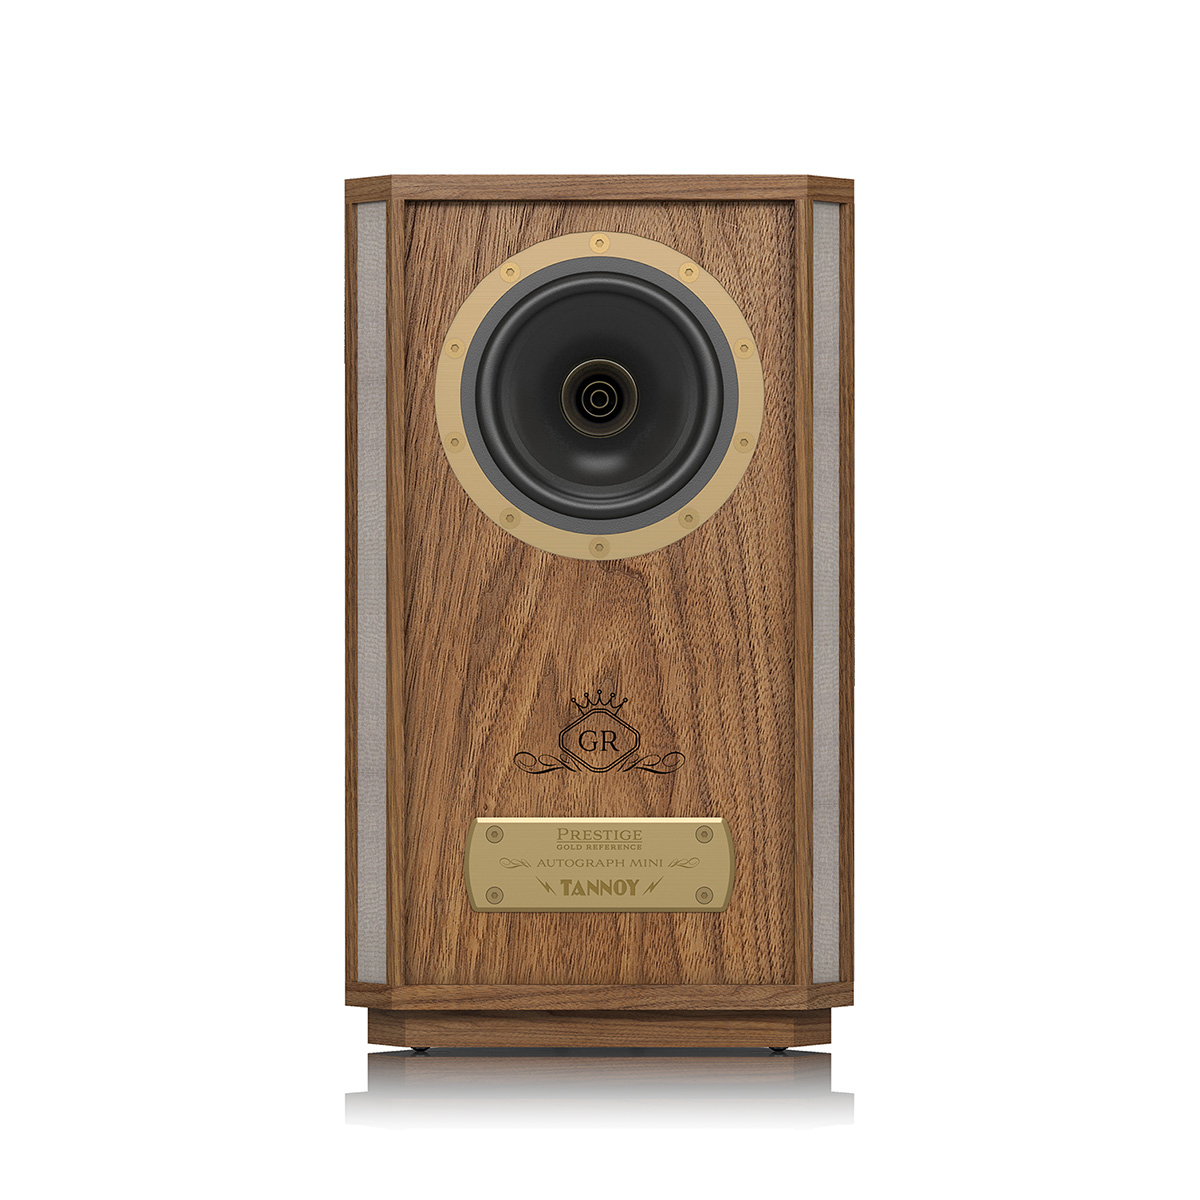 Tannoy gold. Tannoy Autograph Mini. Tannoy Gold 8. Tannoy Gold 5. Tannoy Autograph Mini Diatone 610.